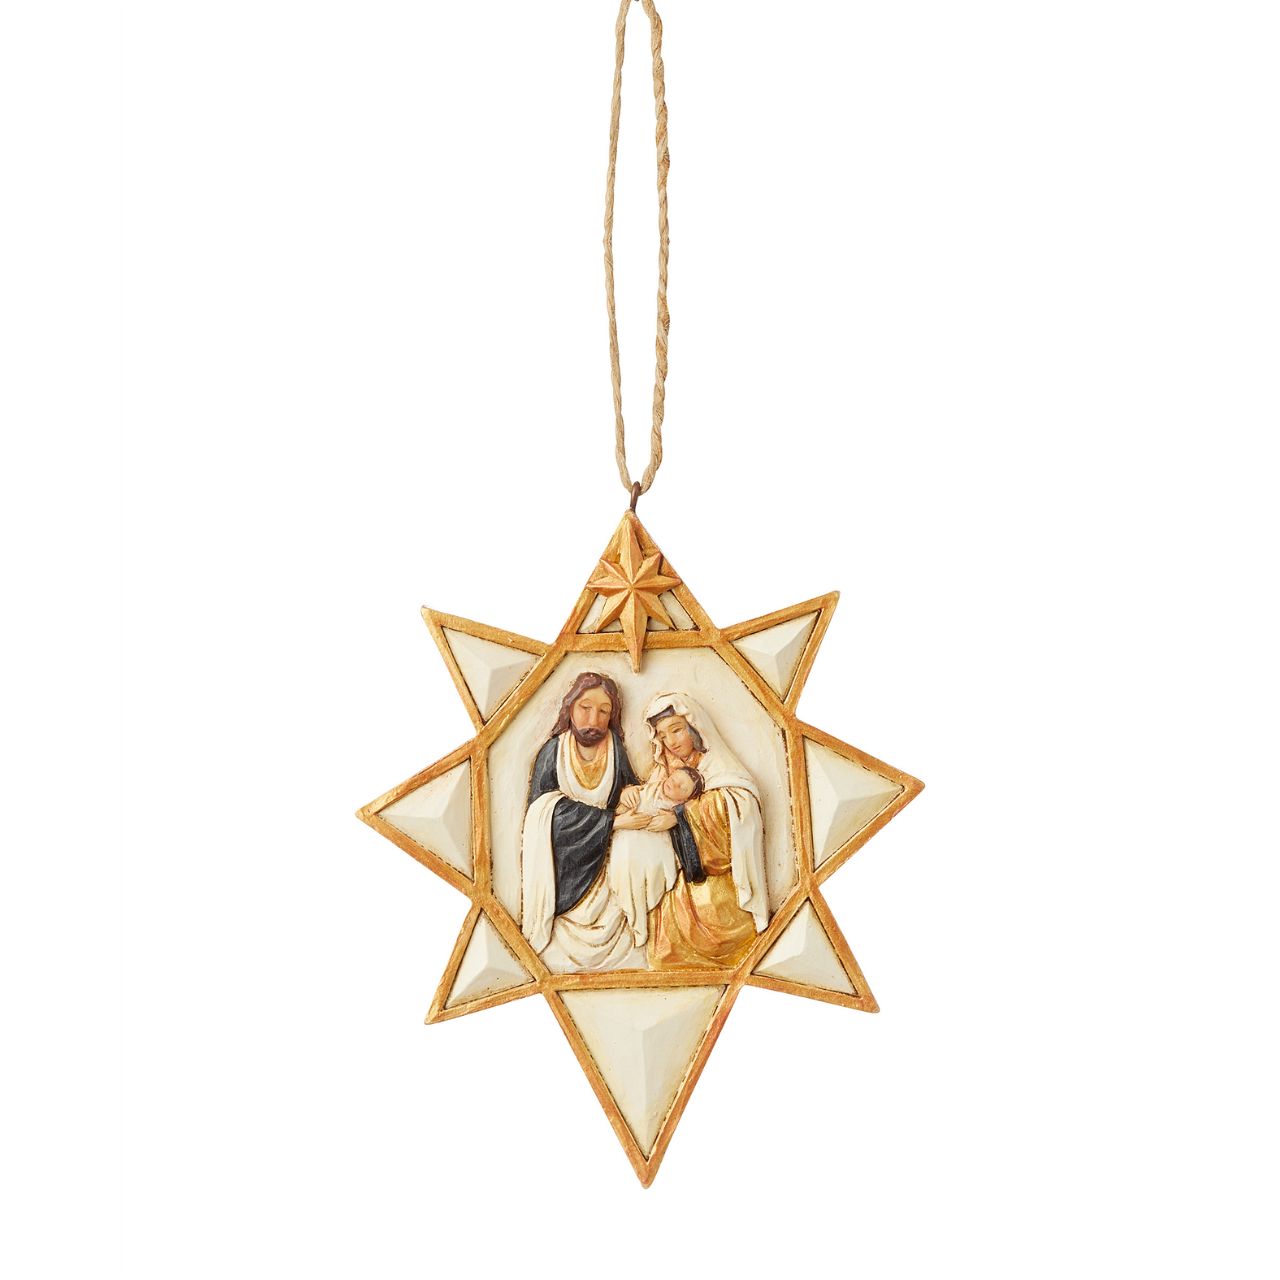 Jim Shore Black and Gold Nativity Star Hanging Ornament  Jim Shore's stunning Black & Gold collection features unmistakable style finished with striking, contrasting colour. This beautiful Nativity ornament design details the timeless story at the heart of Christmas.